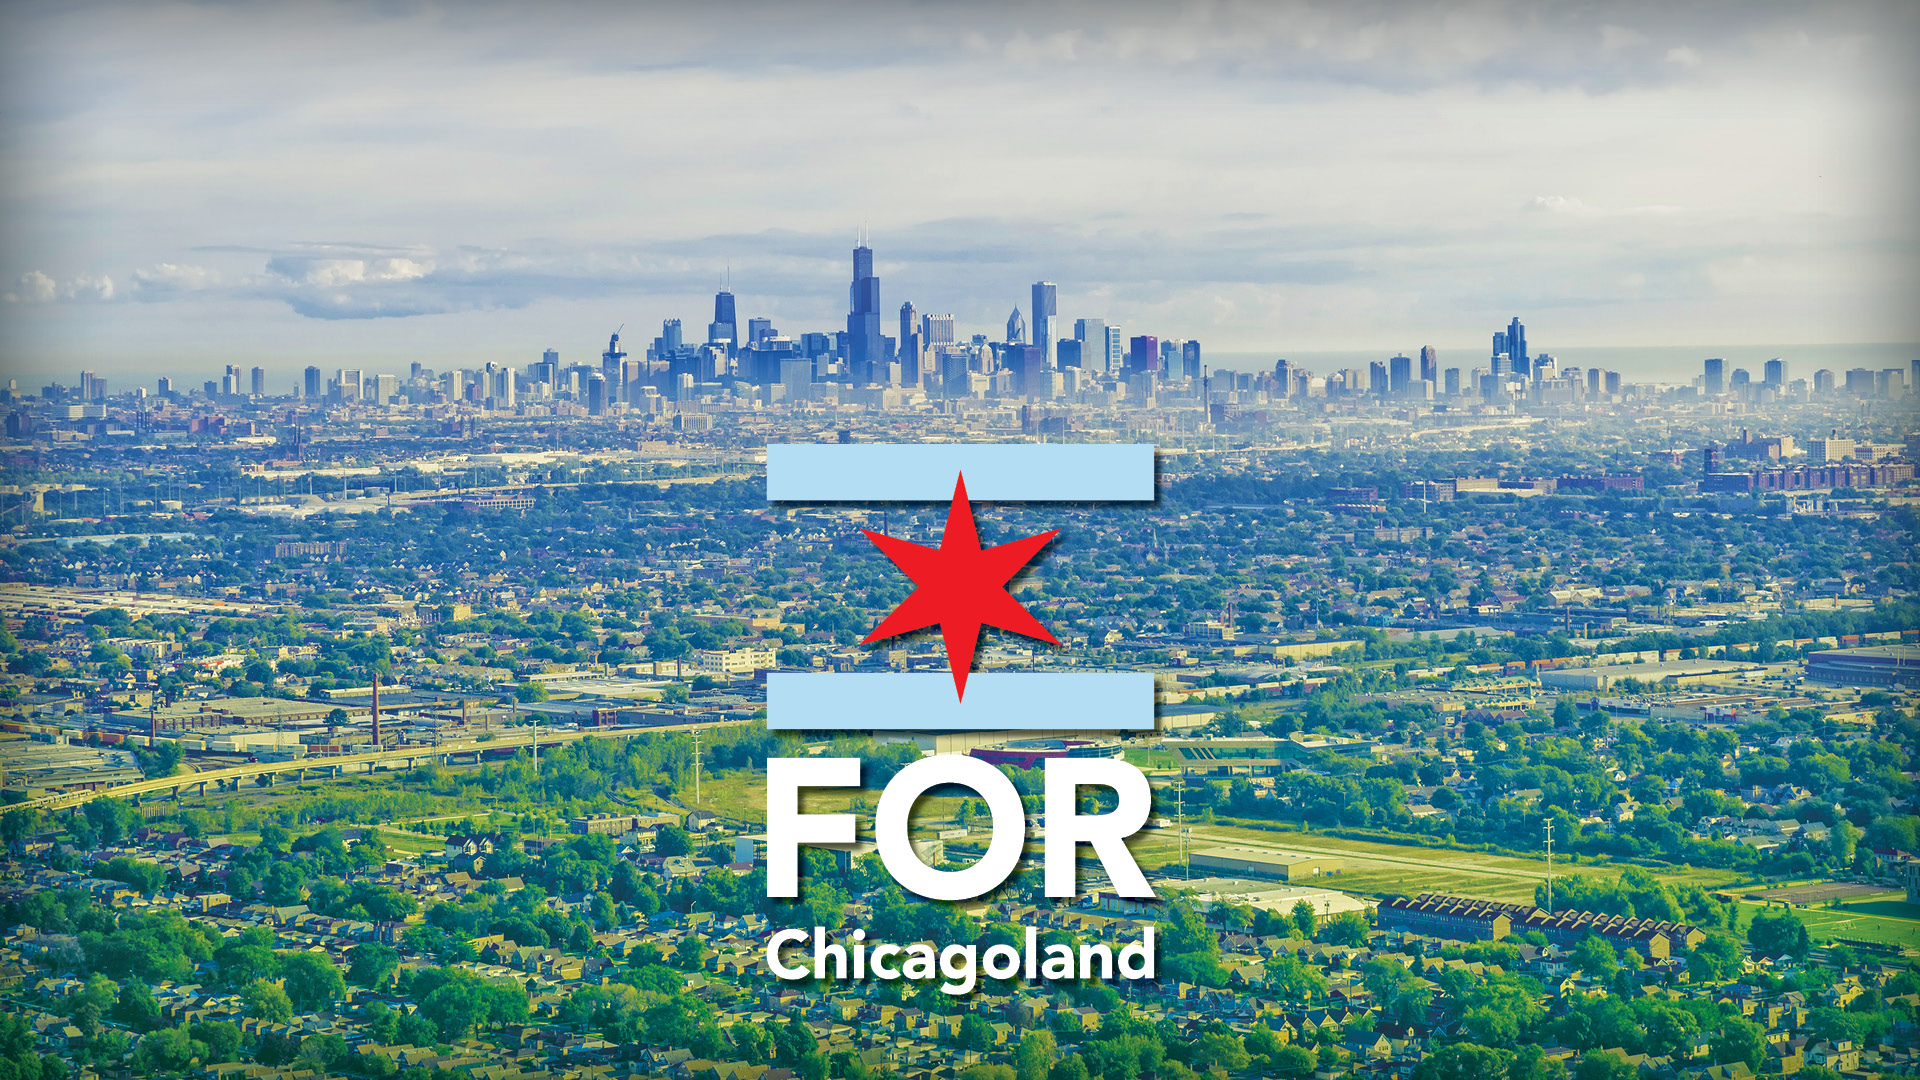 For Chicagoland
First Saturday Serve | October 7
Annual Day of Service | October 28
